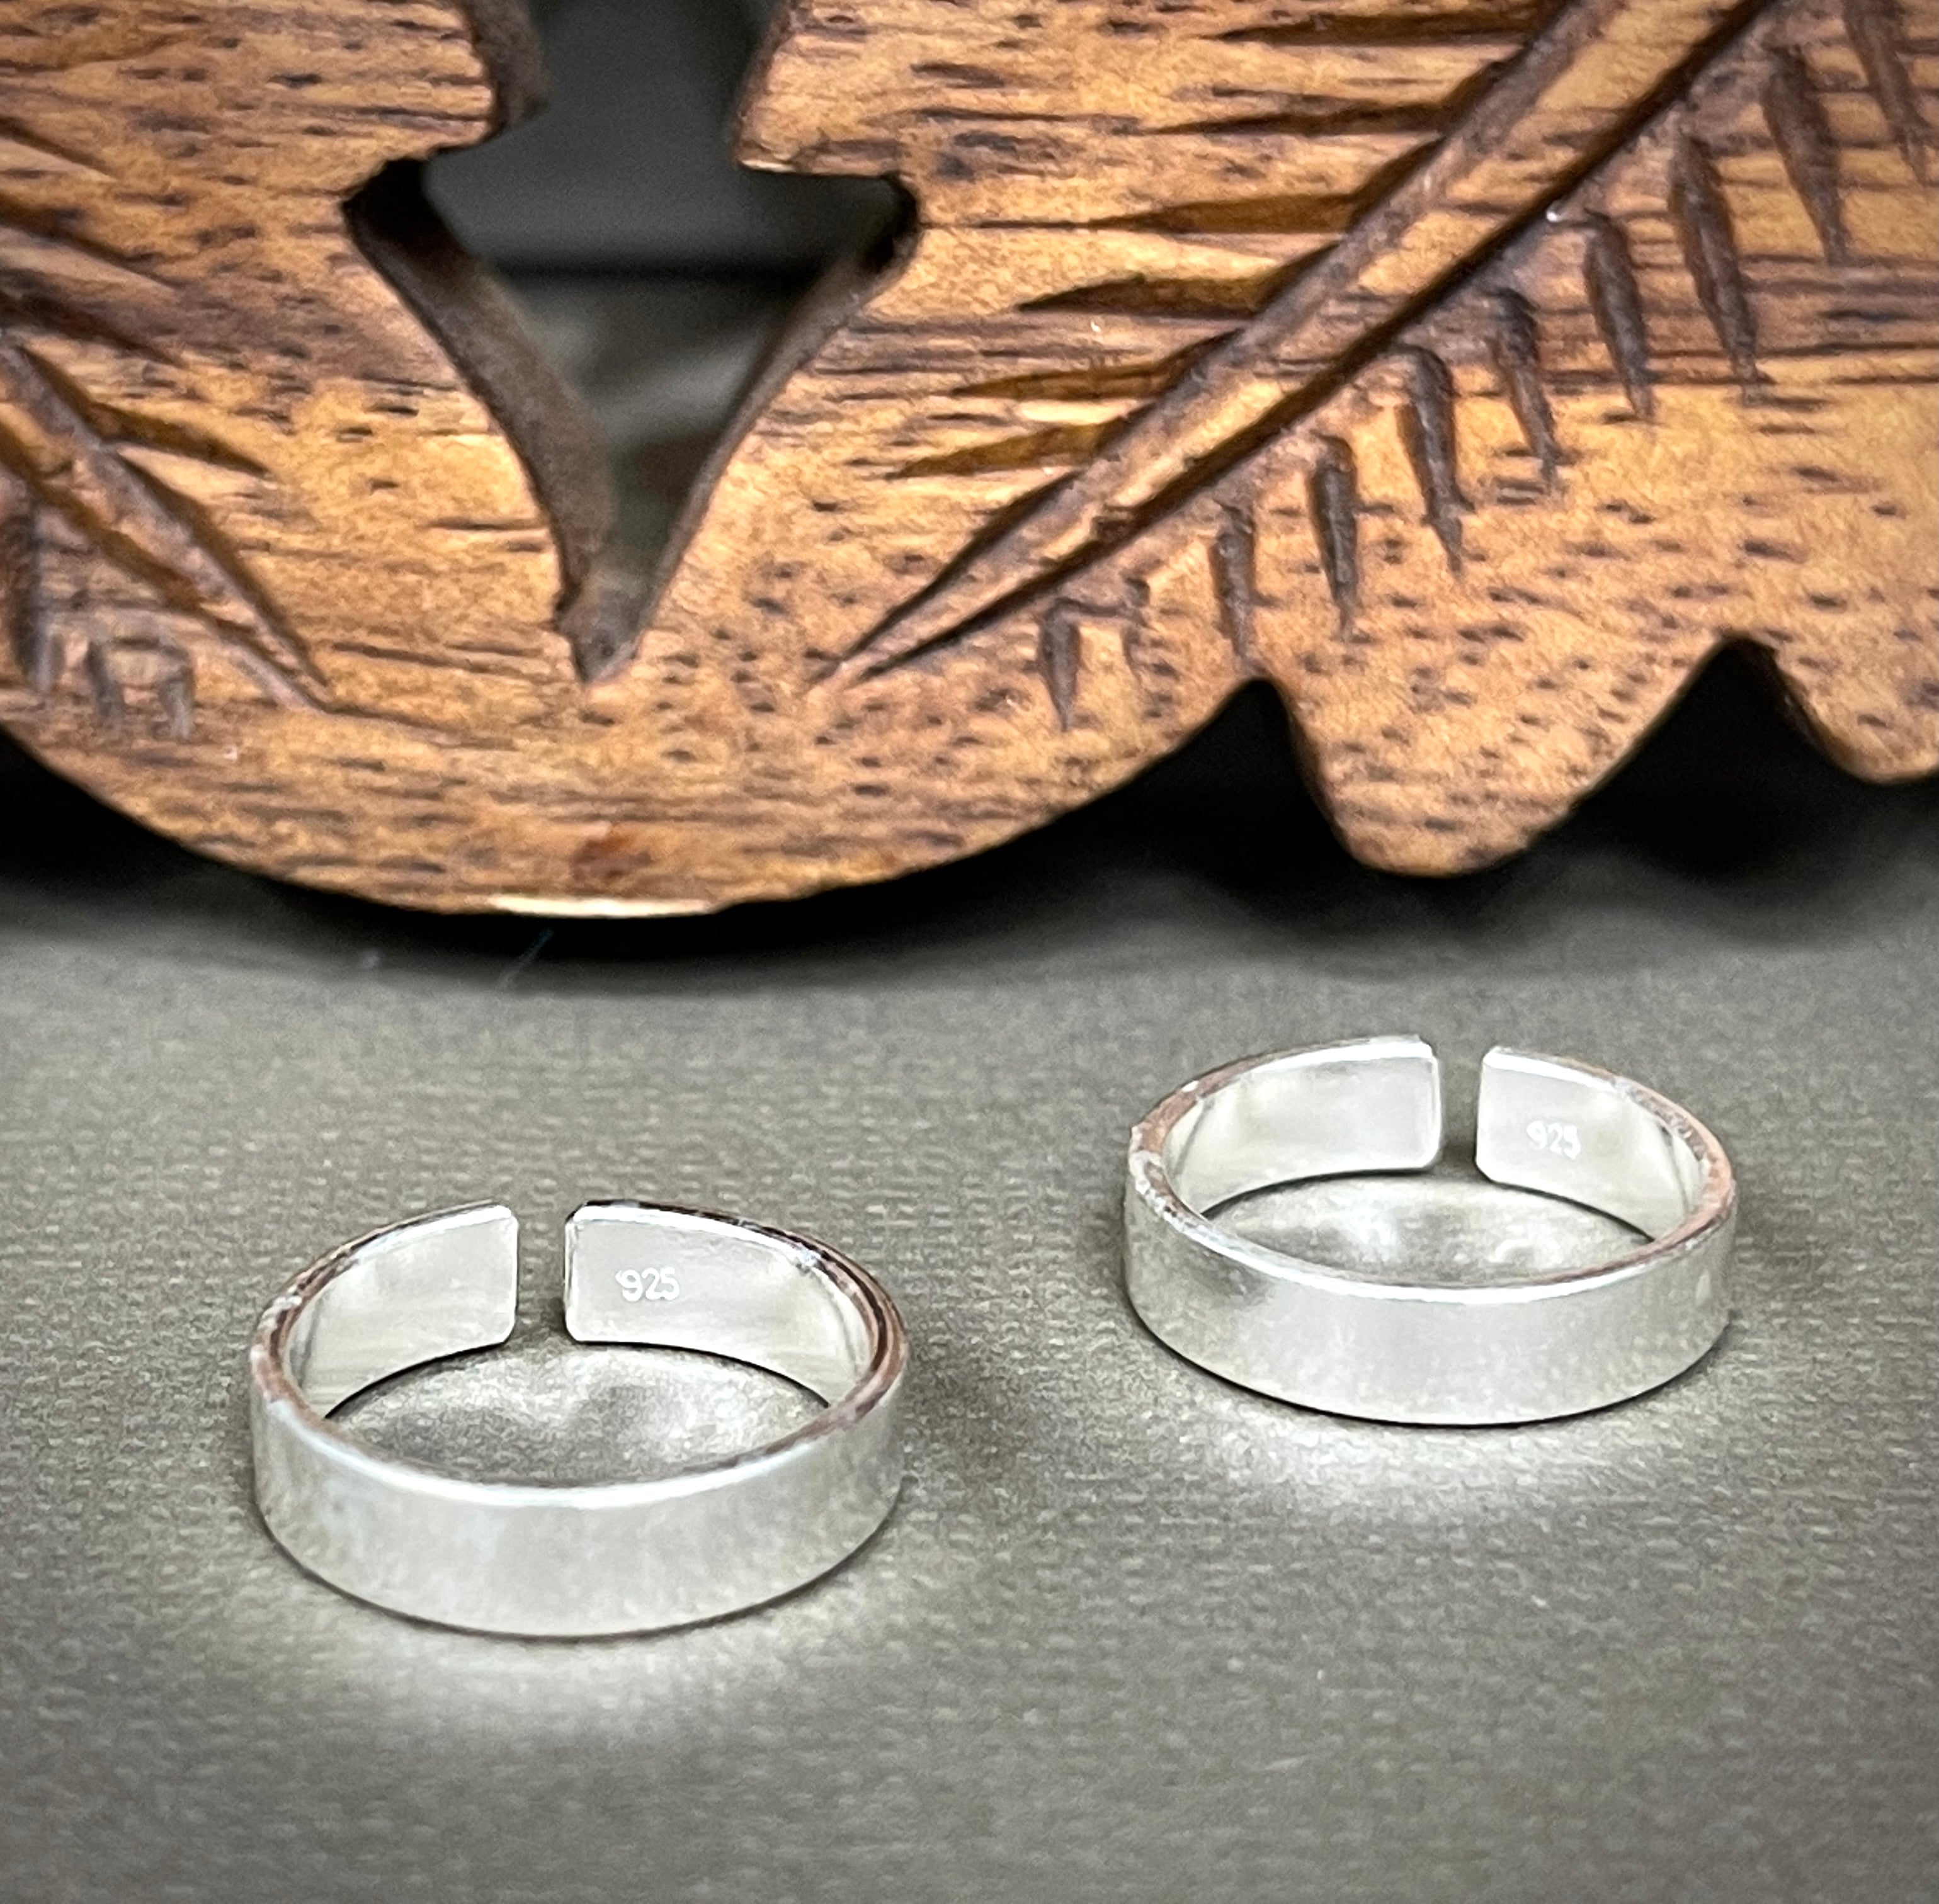 Toe Rings In Thane, Maharashtra At Best Price | Toe Rings Manufacturers,  Suppliers In Thane